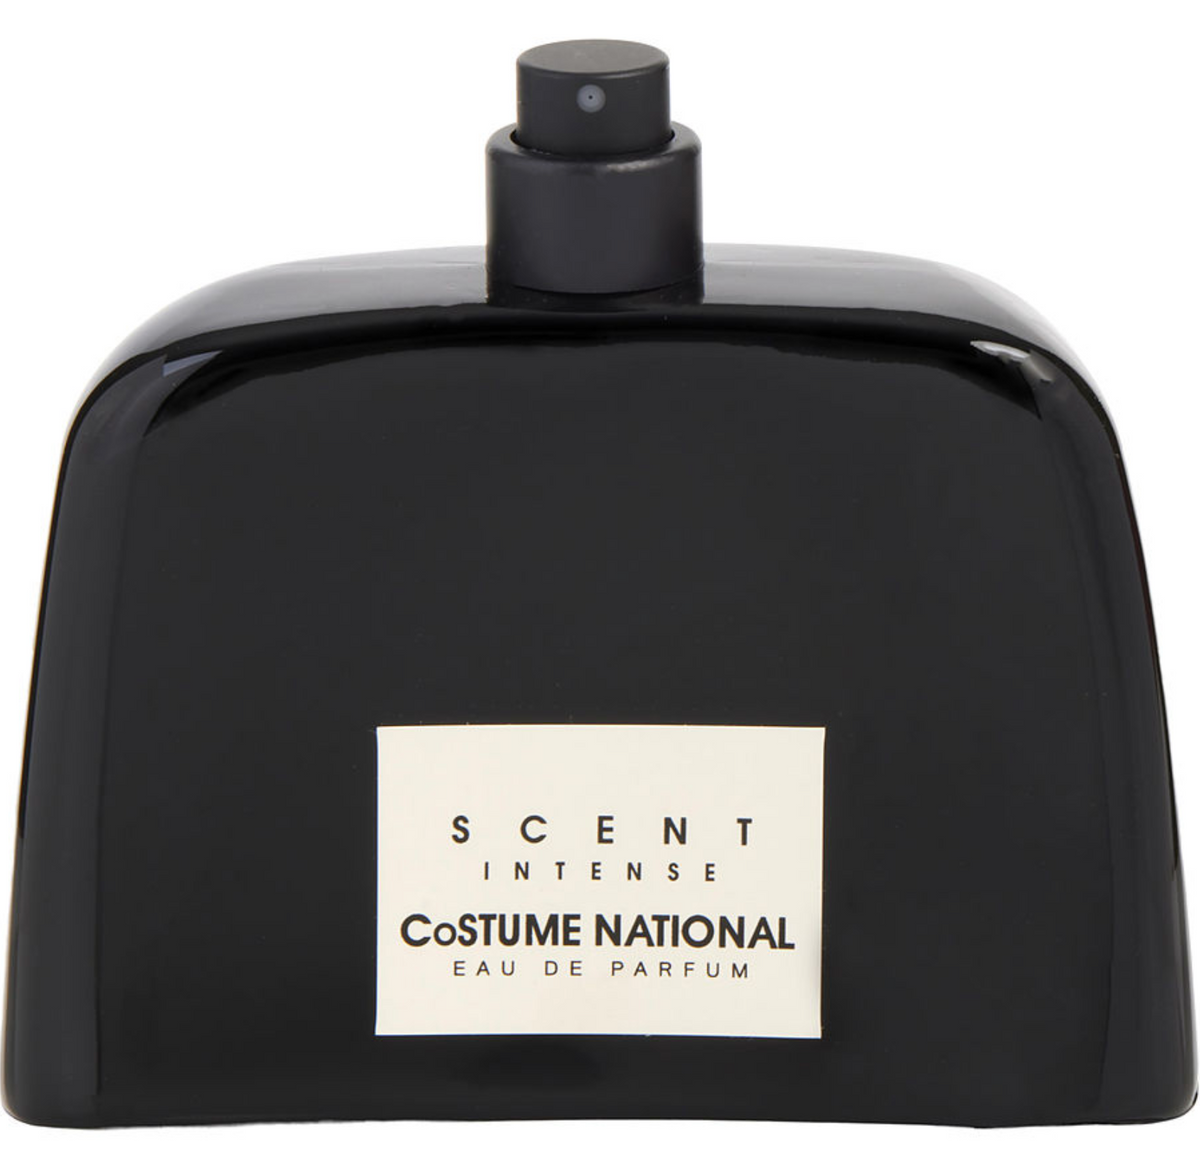 Costume National Scent Intense Sample